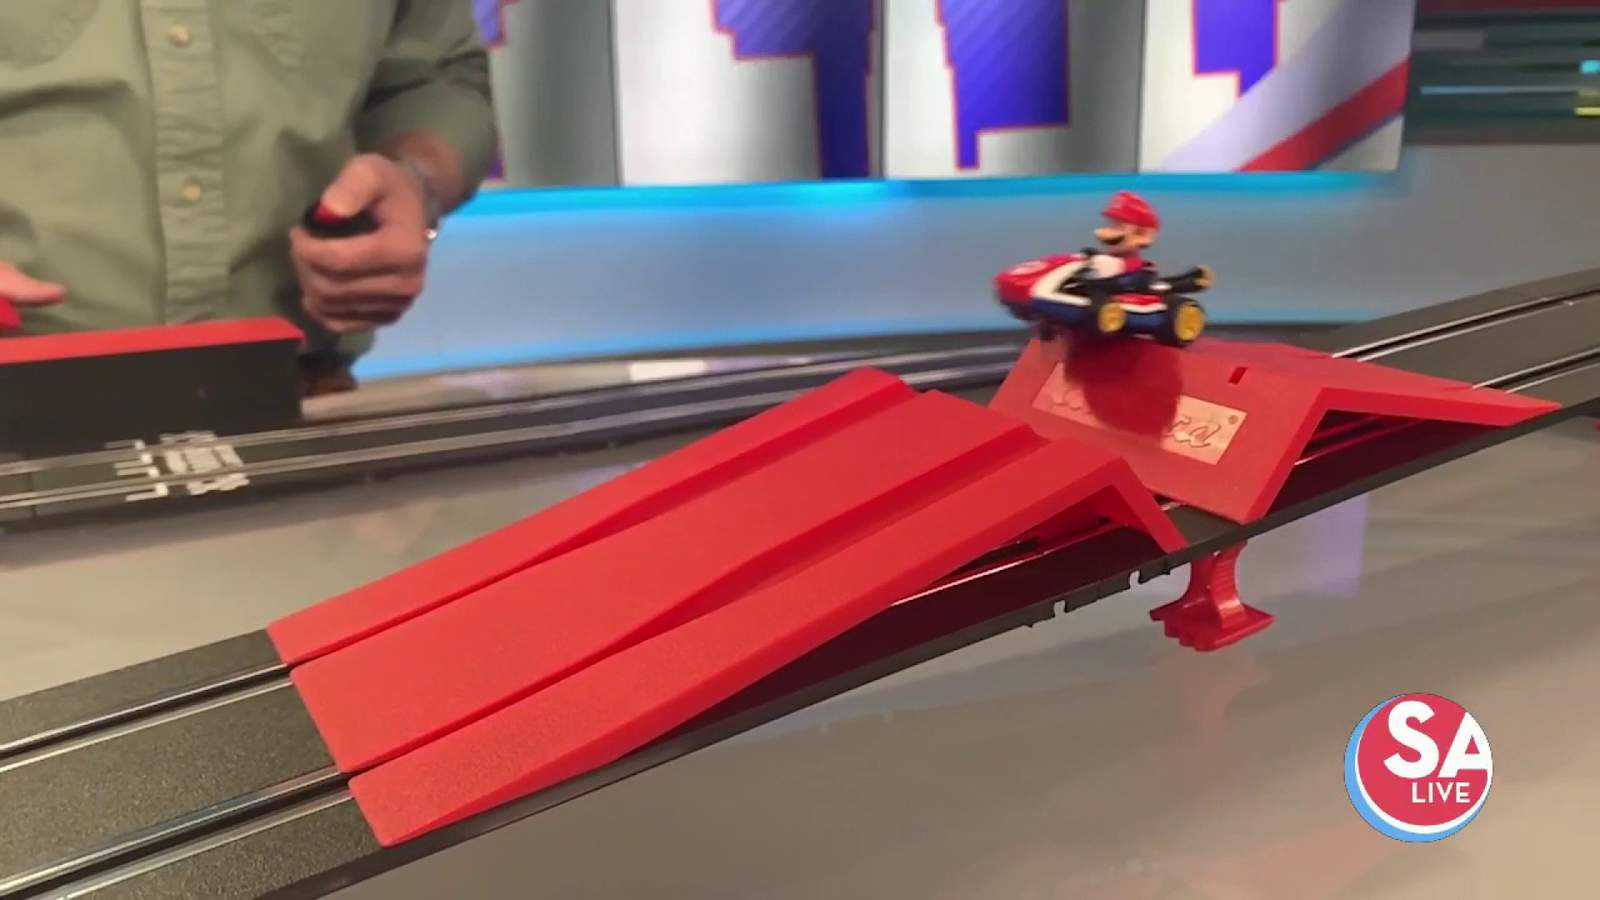 Slot car racing making a comeback with todays kids